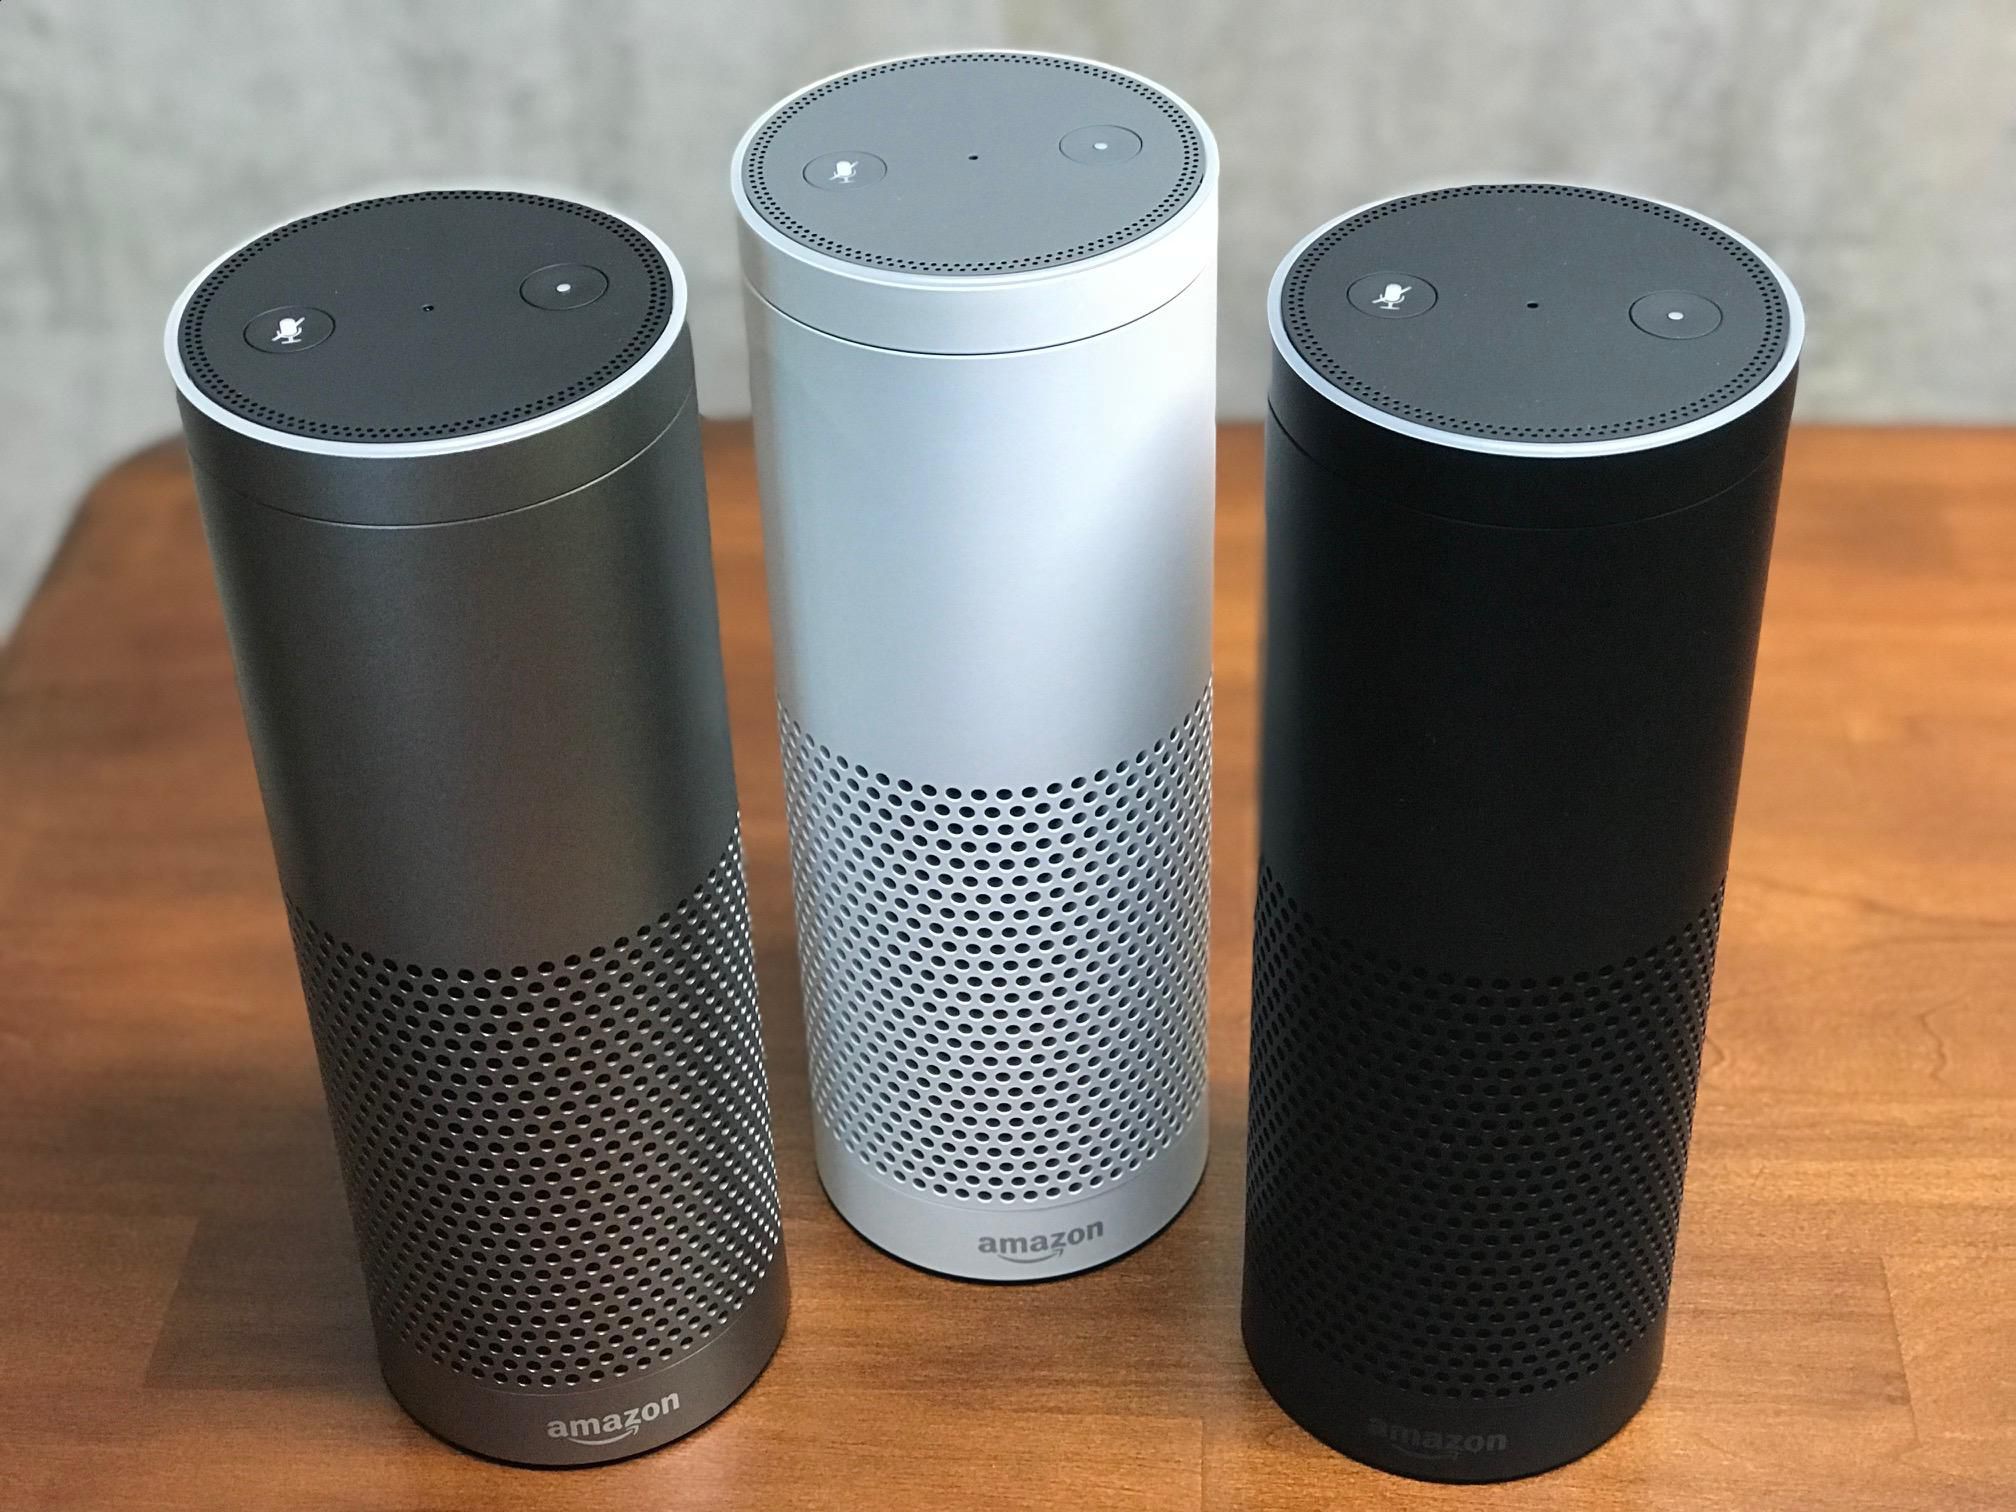 Just Unveiled a Brand-New $150 Echo Plus